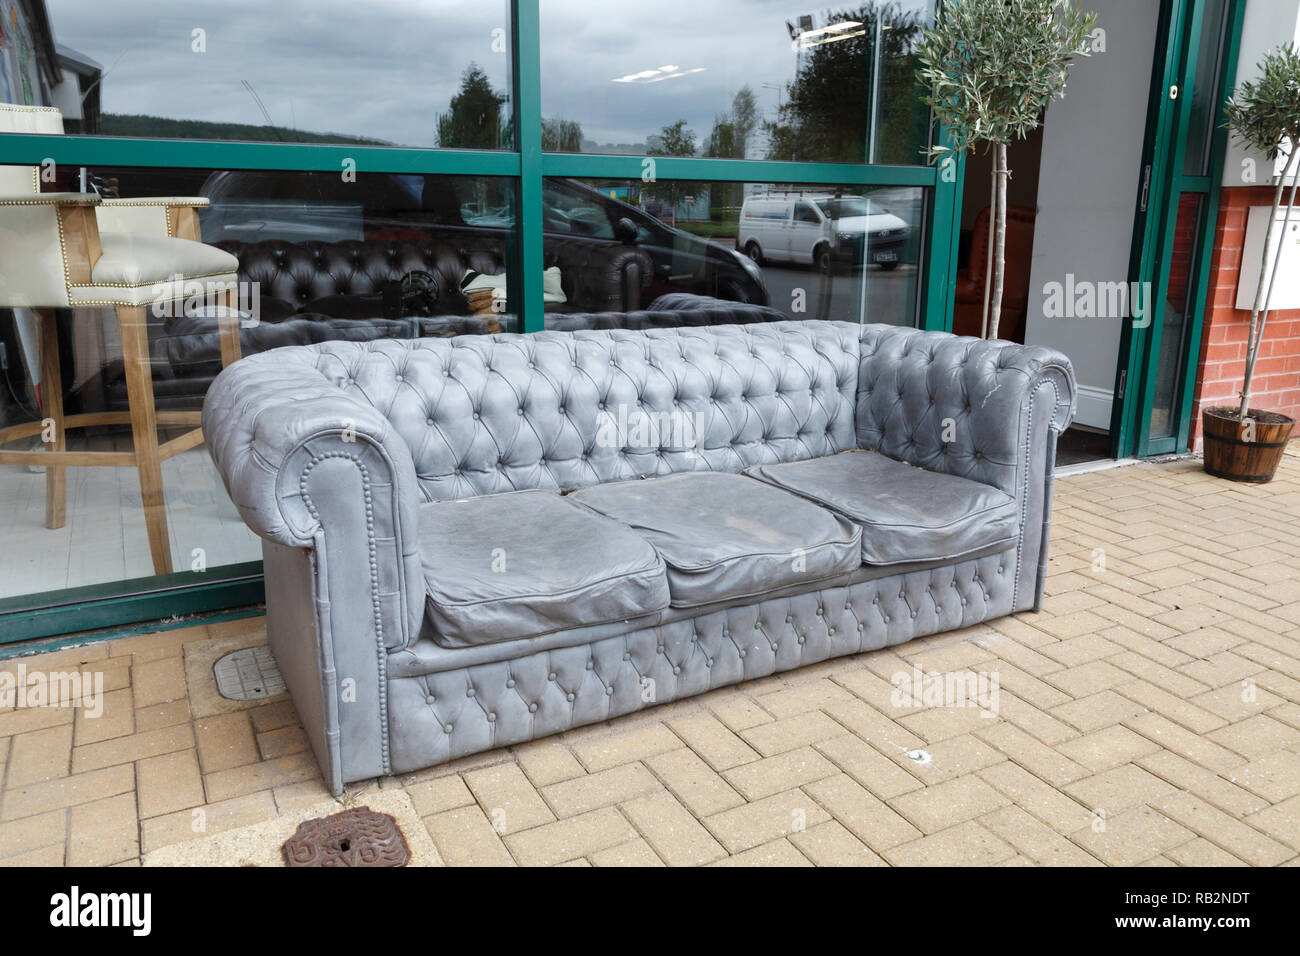 grey couch made of stone in front of a furniture store, UK Stock Photo